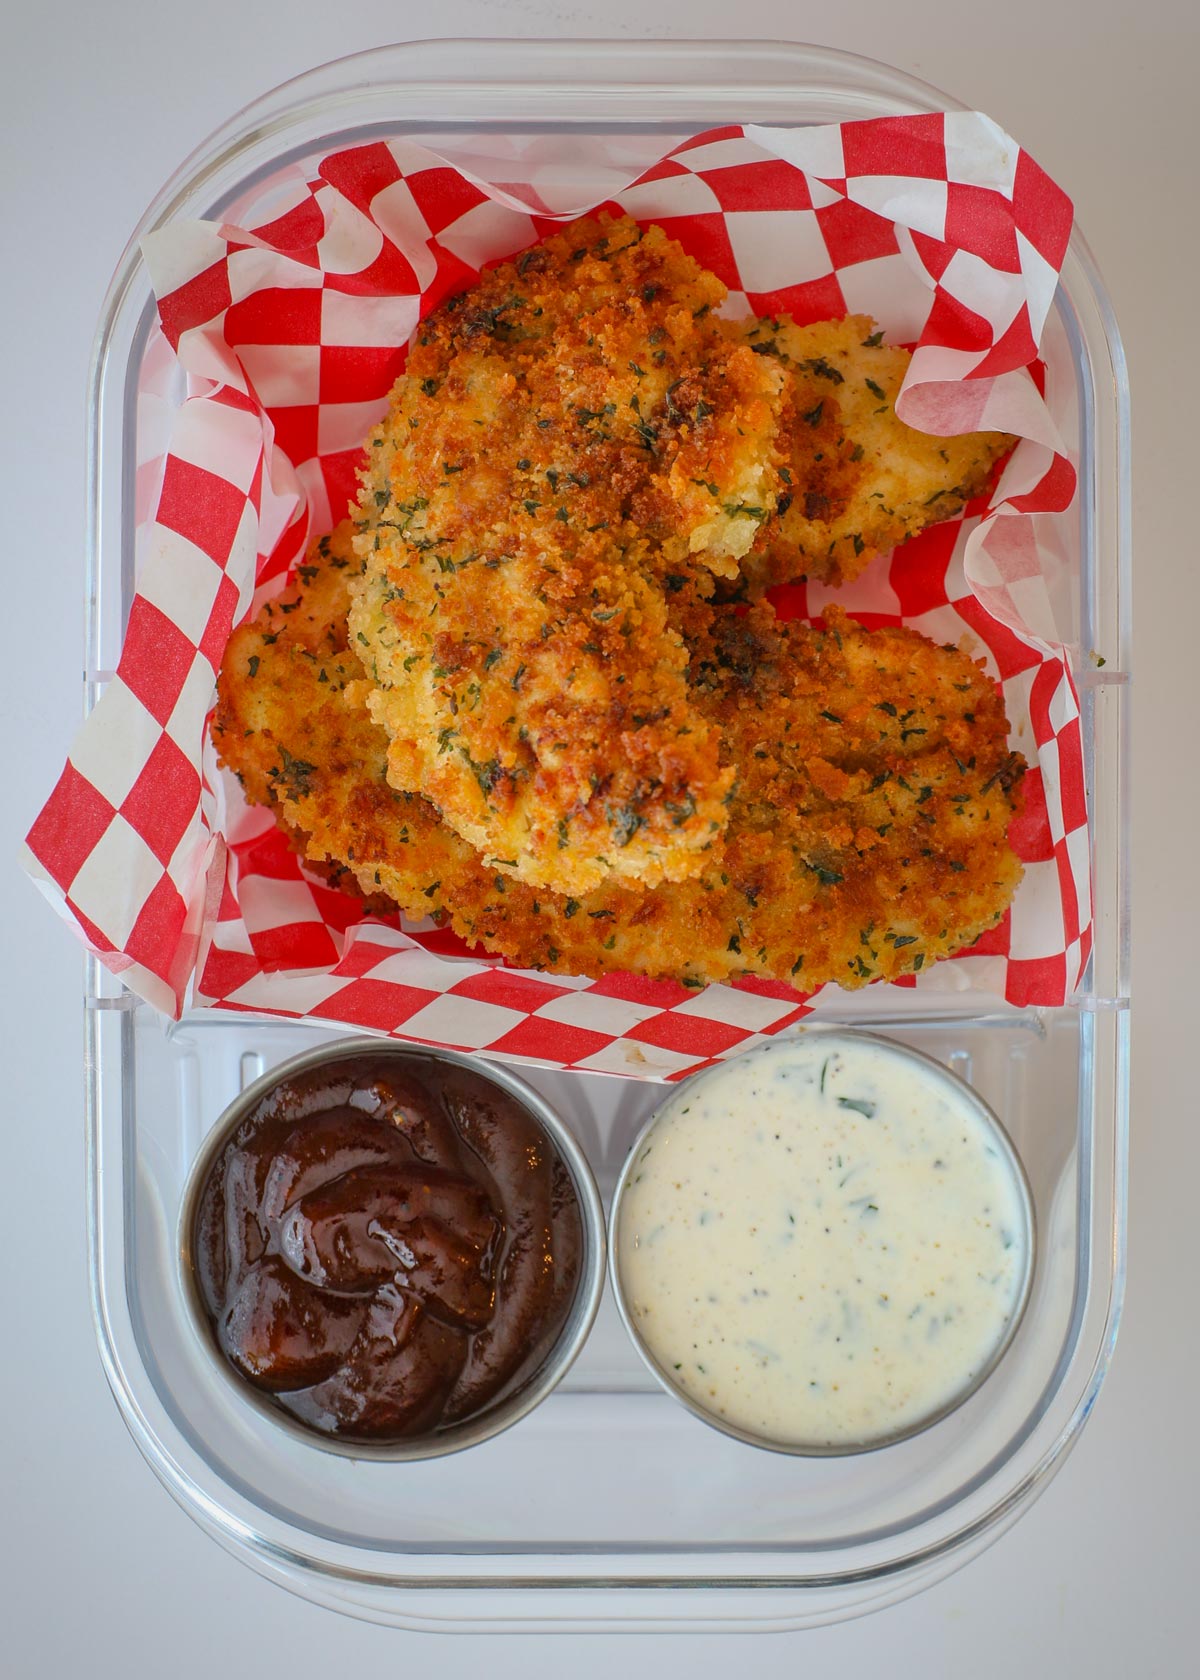 fried chicken strips in a meal prep container lined with a checked piece of parchment, with two sauce cups.